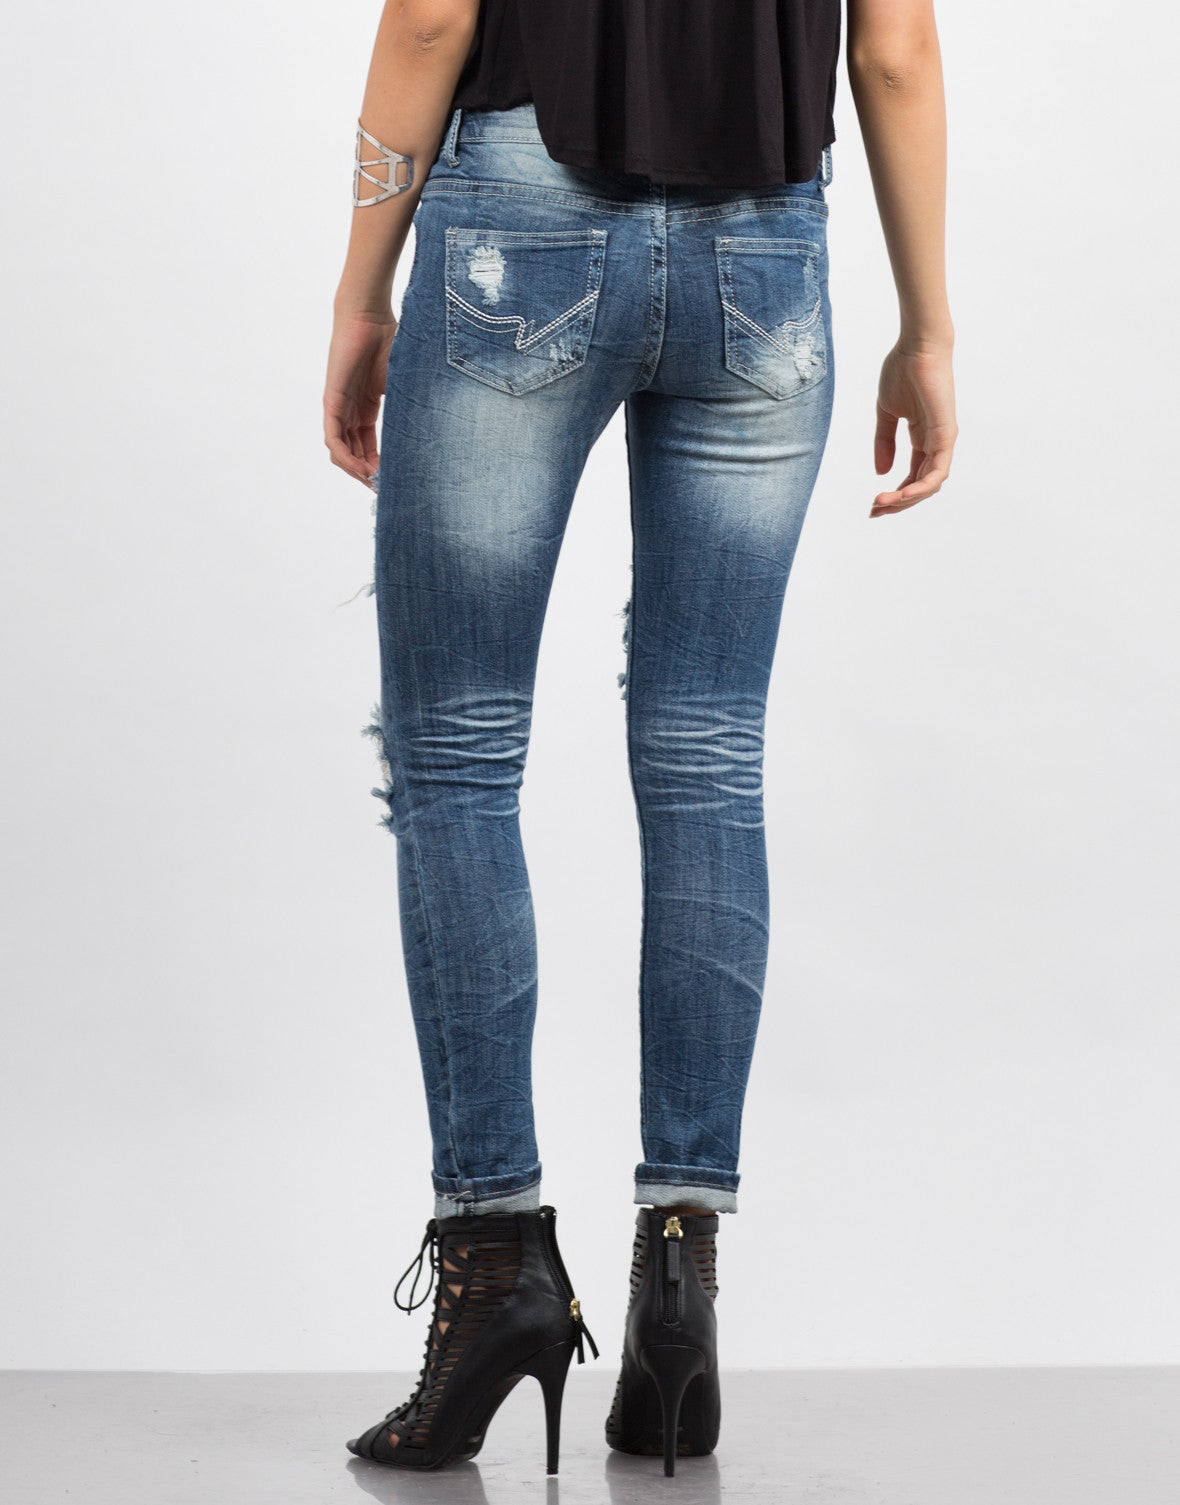 Faded Distressed Rolled Up Jeans - Blue Skinny Jeans - Denim – 2020AVE